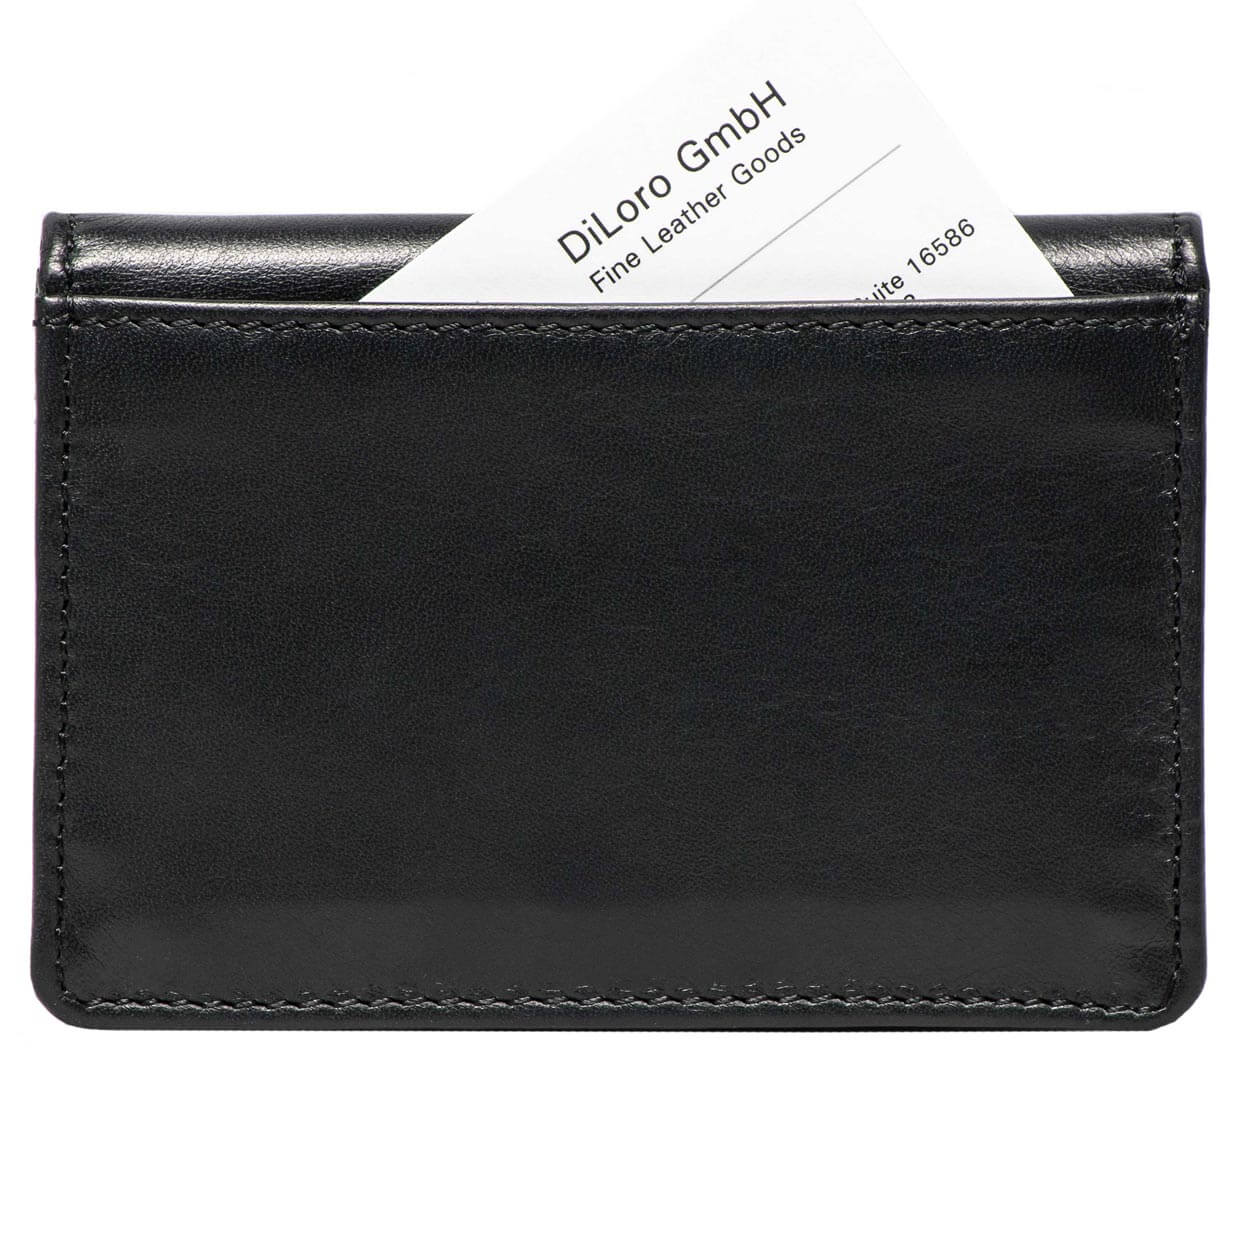 DiLoro Travel Leather Business Card Wallets - Back View